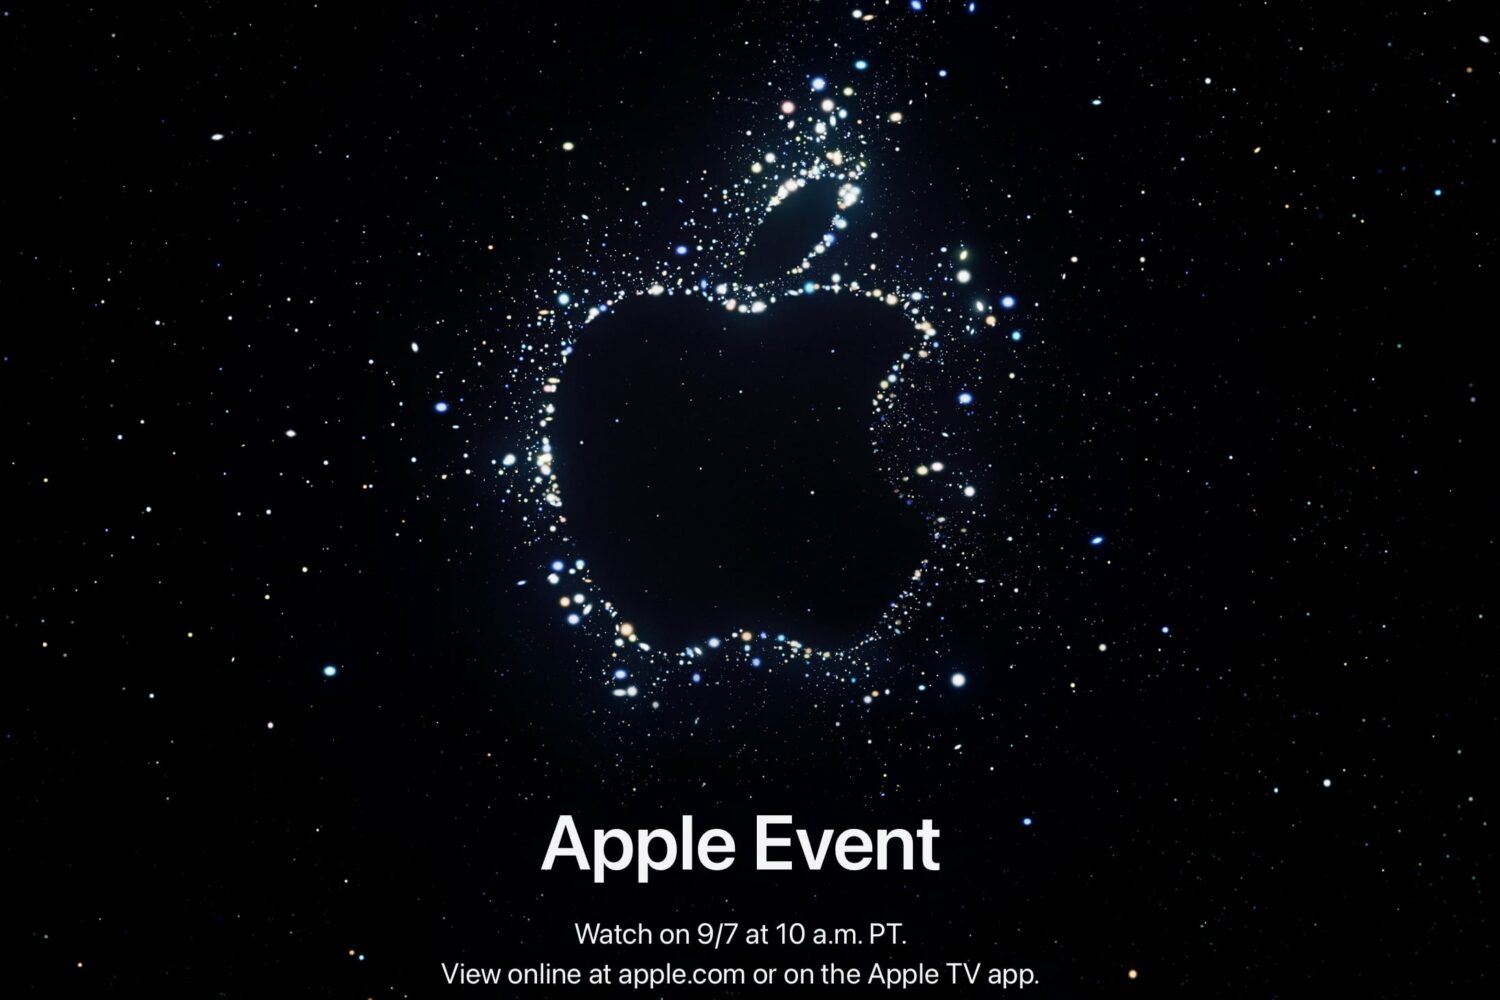 Apple invite for the September 2022 iPhone 14 event snows an Apple logo outline set against a galactic cluster background